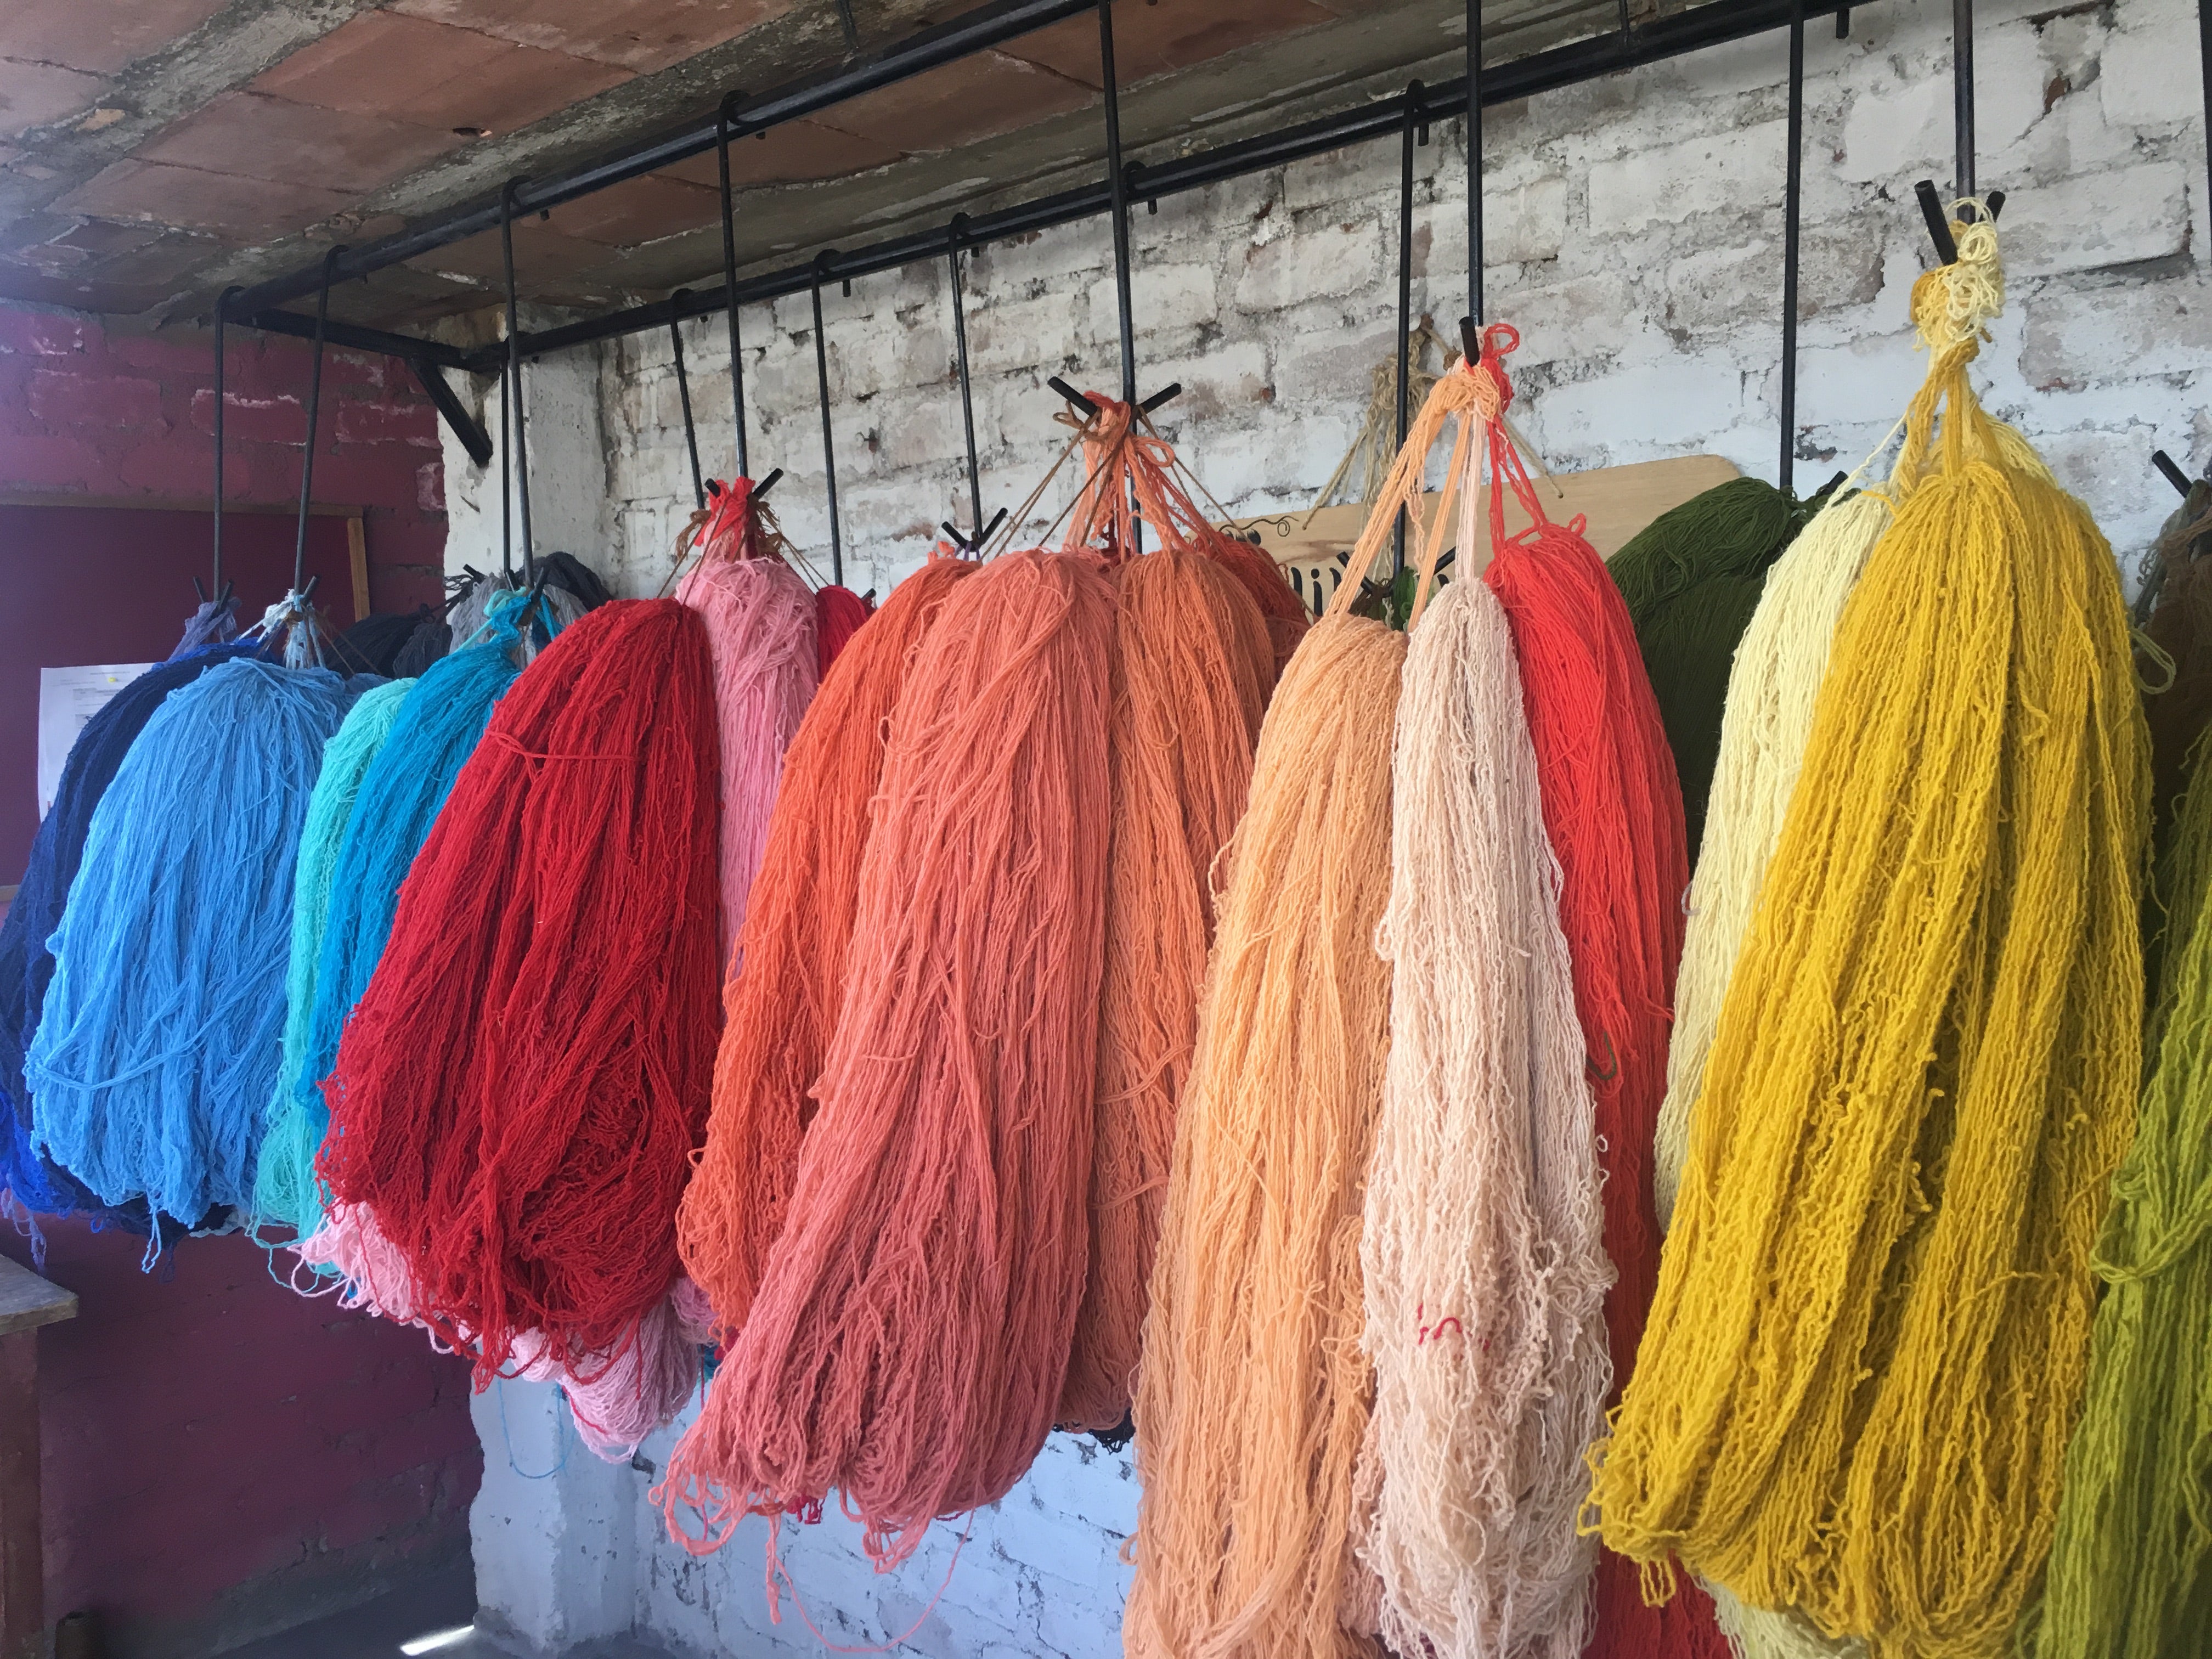 Colorful hand dyed yarn used by fair trade artisans in Peru hanging from the ceiling to dry.